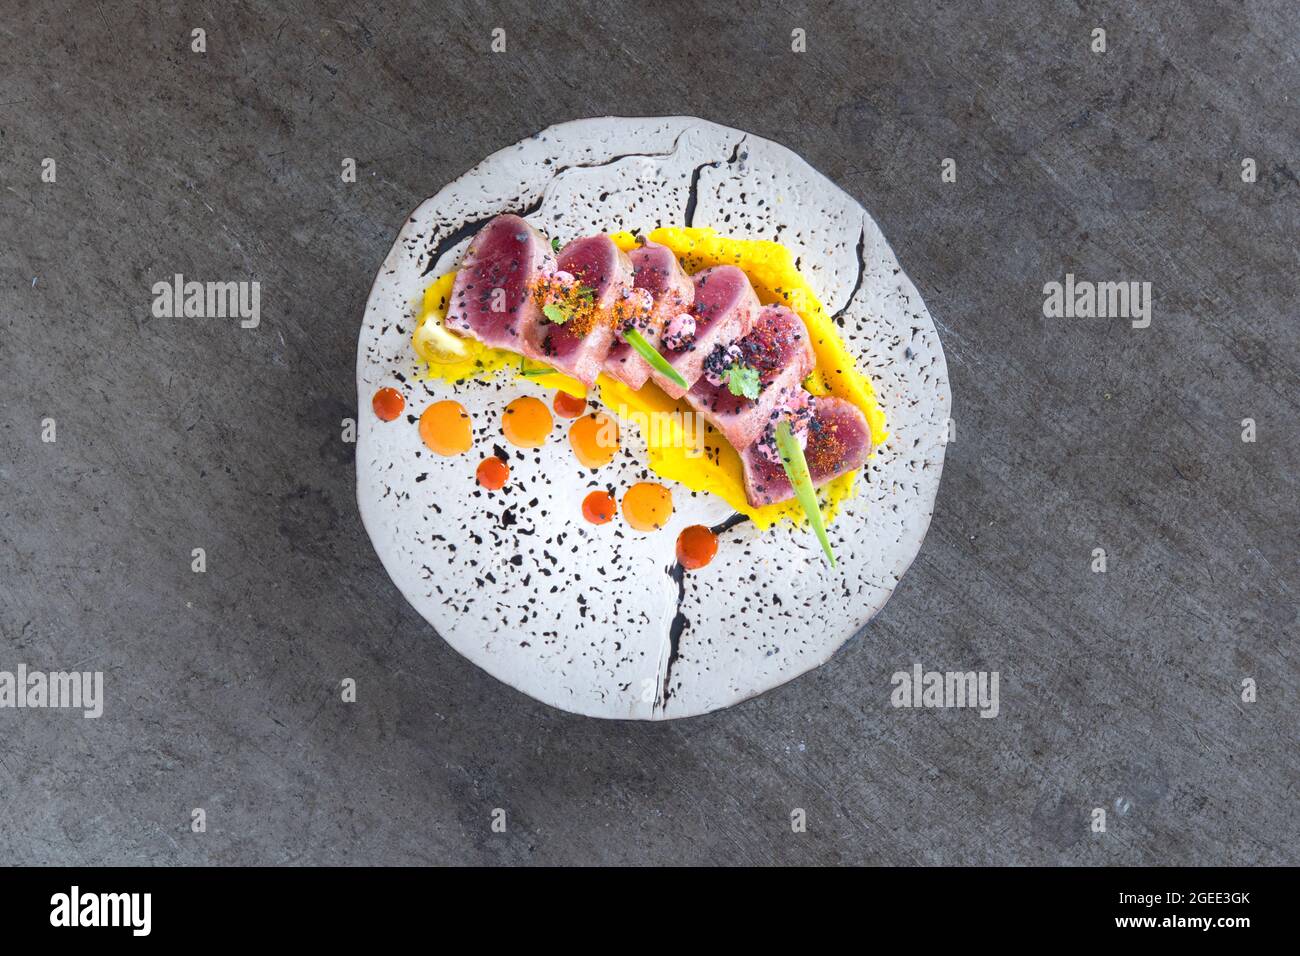 Dish above view meat slides , mediterranean food fusion creative plate. Spain food. Stock Photo